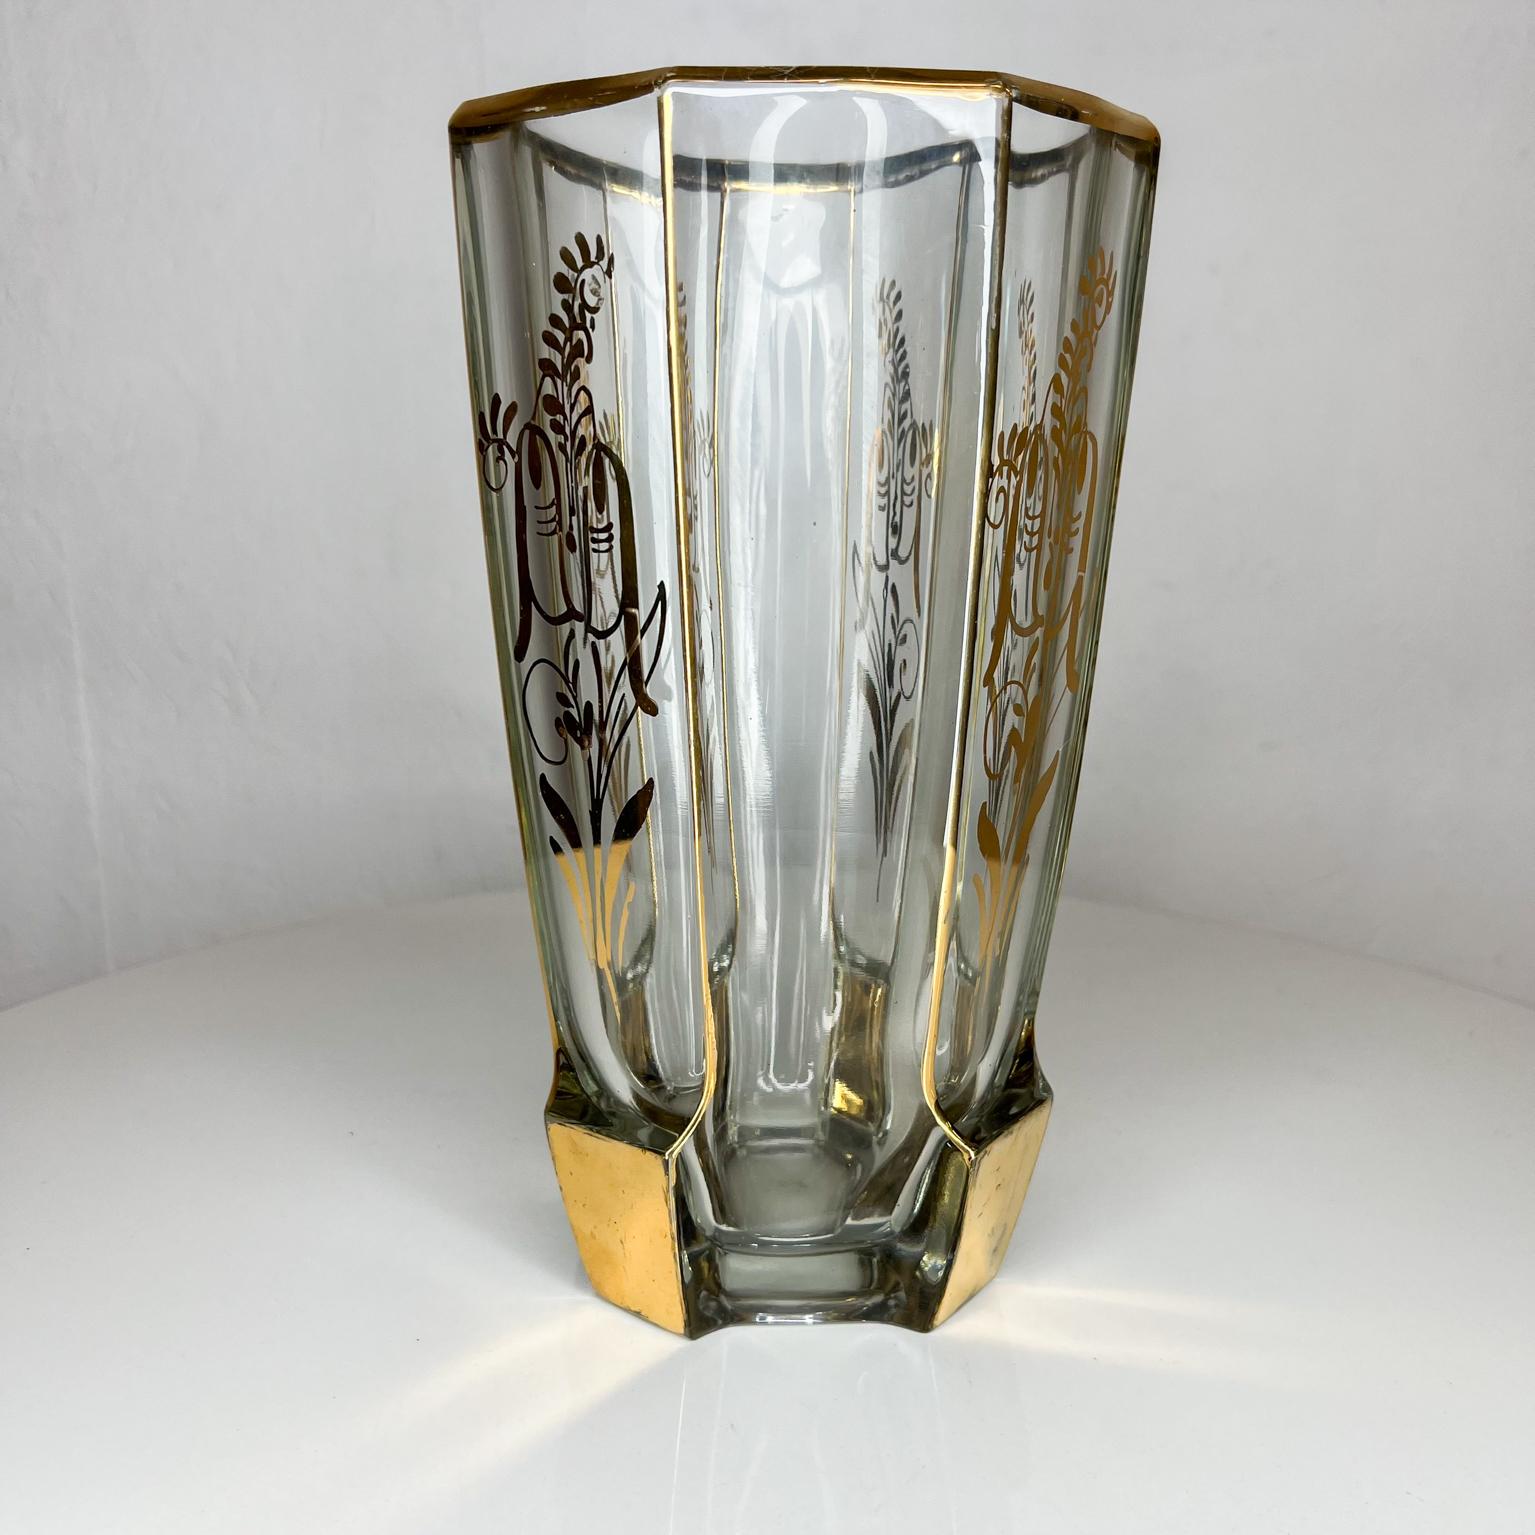 Mid Century-Hollywood Regency decorative glass Vase with gold painted design.
No label or maker information present
9.88 h x 5.88 in diameter
Preowned unrestored vintage condition.
See images please.


